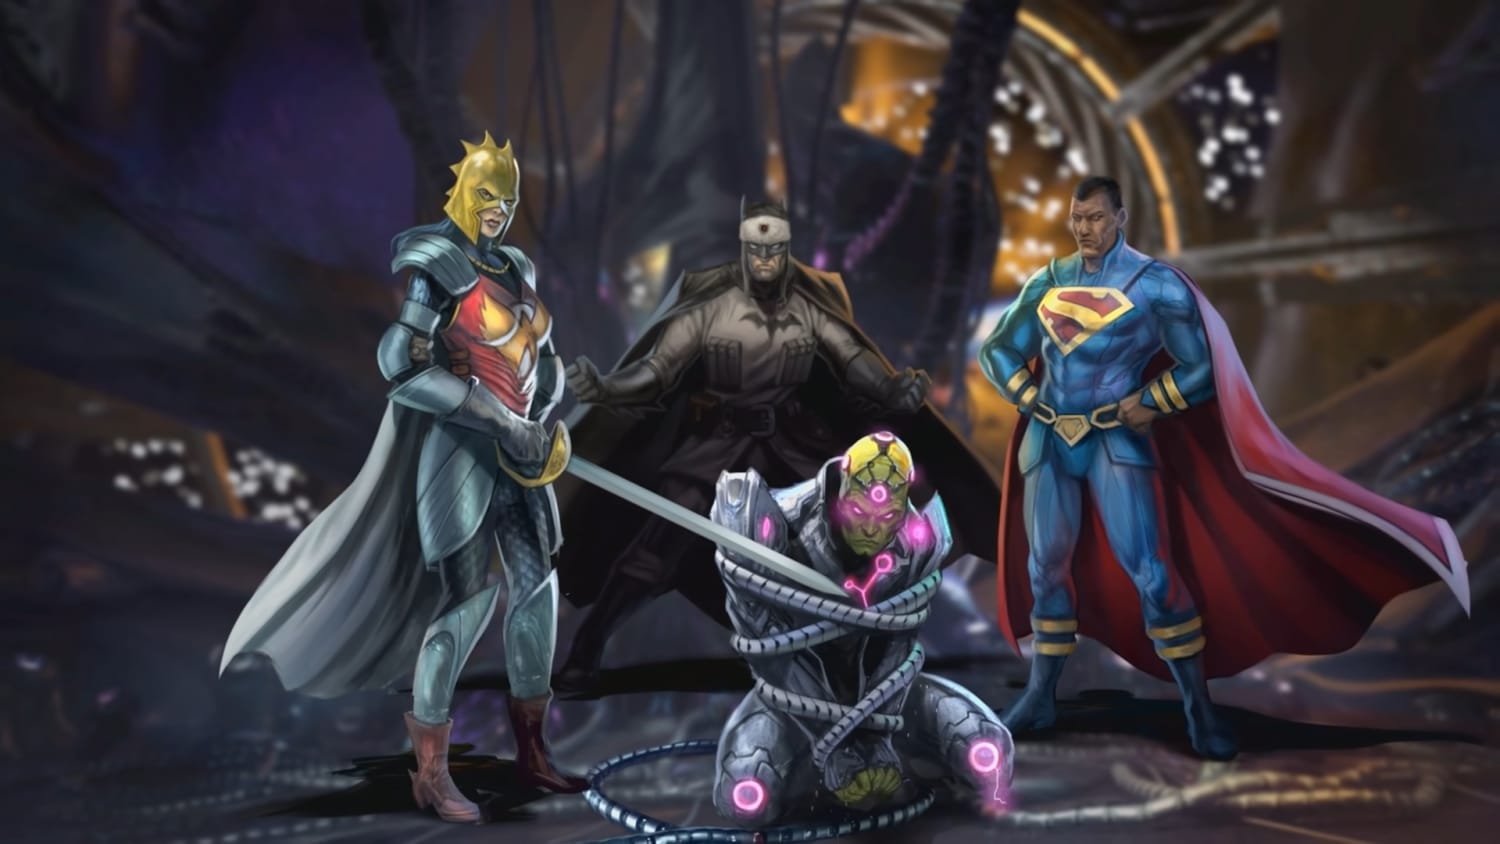 [Video Games] I recognize only one multiverse character here. Batman. He's the alternate version from the Superman: Red Son comic. Can someone tell me who is the Wonder Woman and the Superman? And what comics are they from? (Source: Green Lantern's story tower ending on the Injustice 2 video game.)